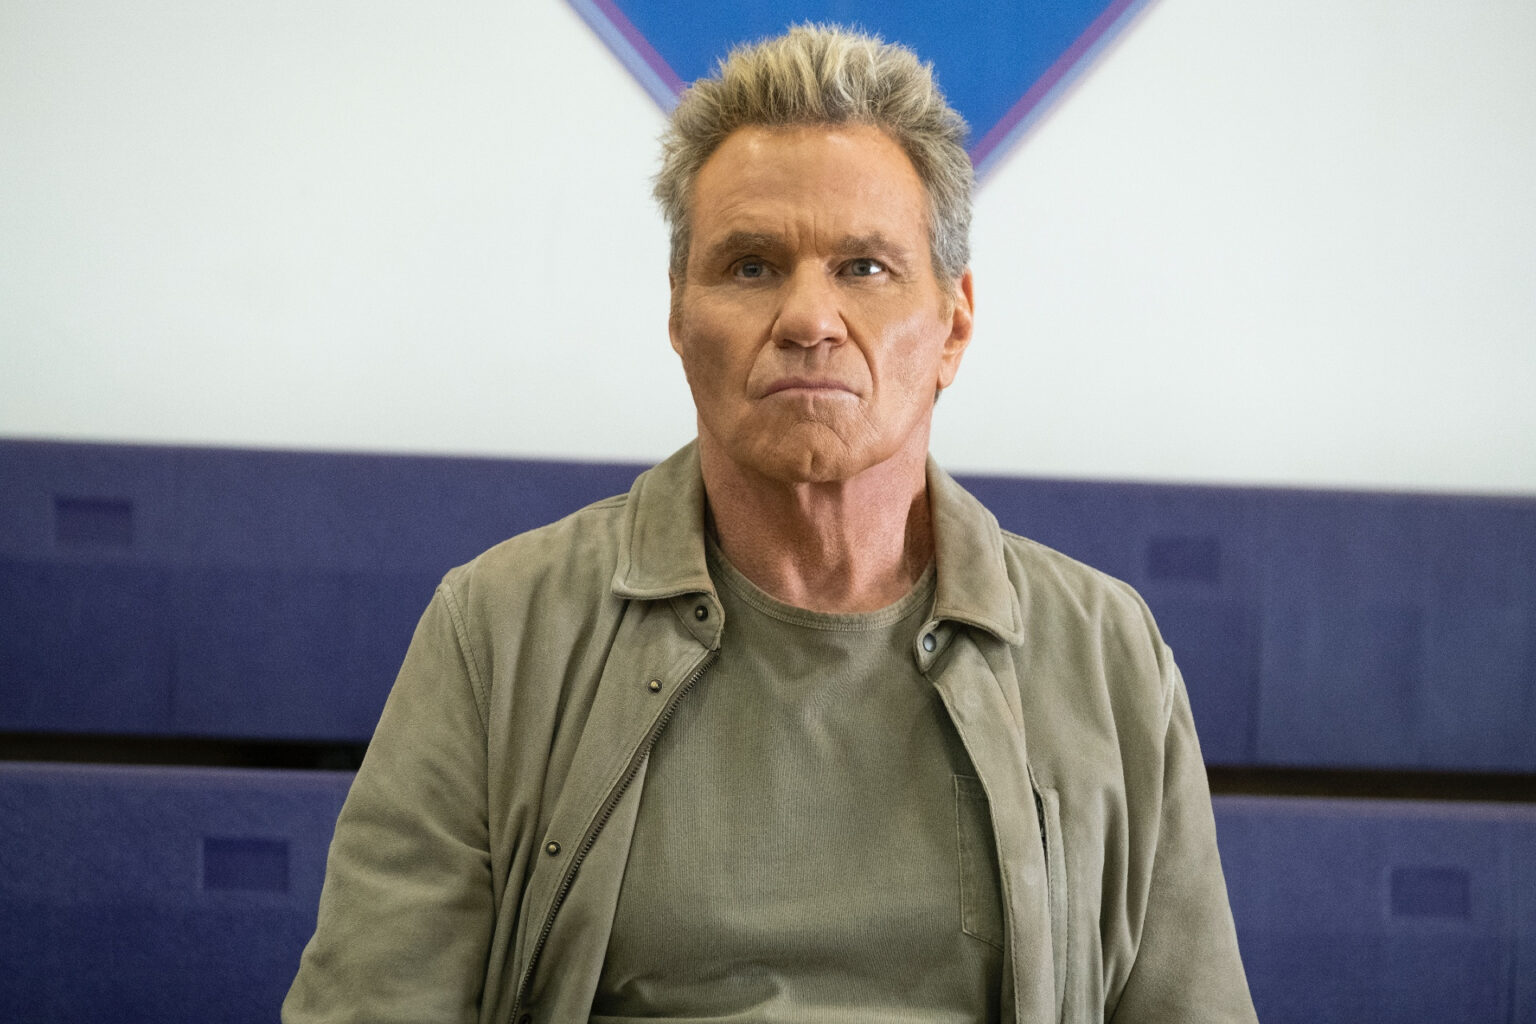 'Cobra Kai' season 3 ended with Kreese reaching out to what we can only assume is an old war buddy. What can we expect from the next season?